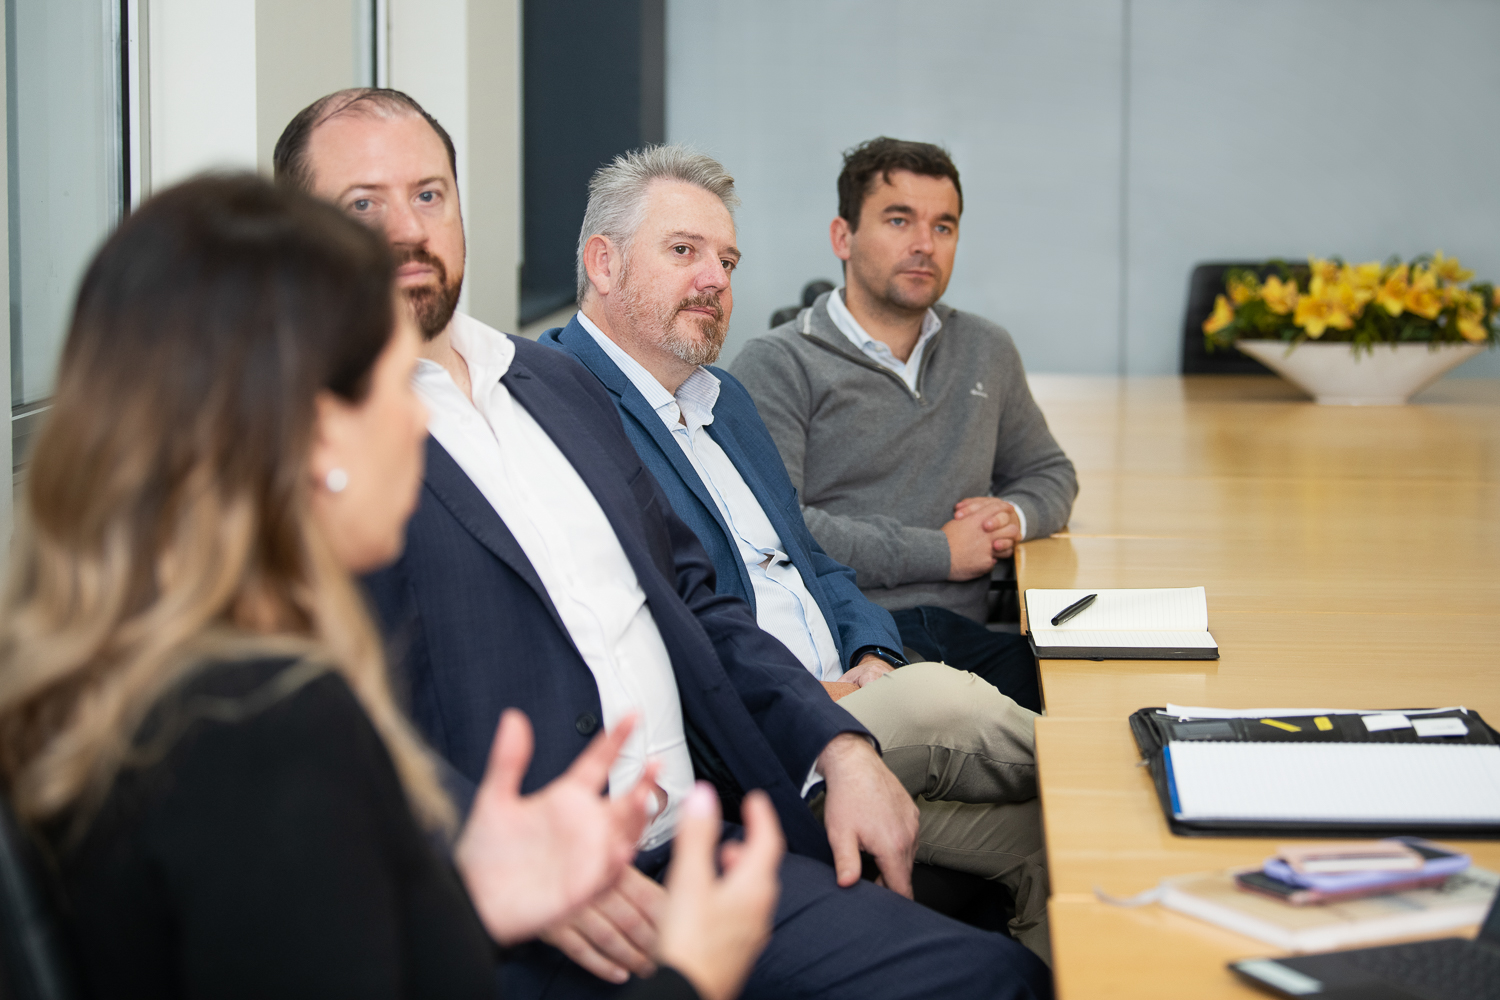 Personal branding photography of melbourne business - in-situ and working together in a collaborative way. Four staff members engage in a meeting at a large boardroom table.